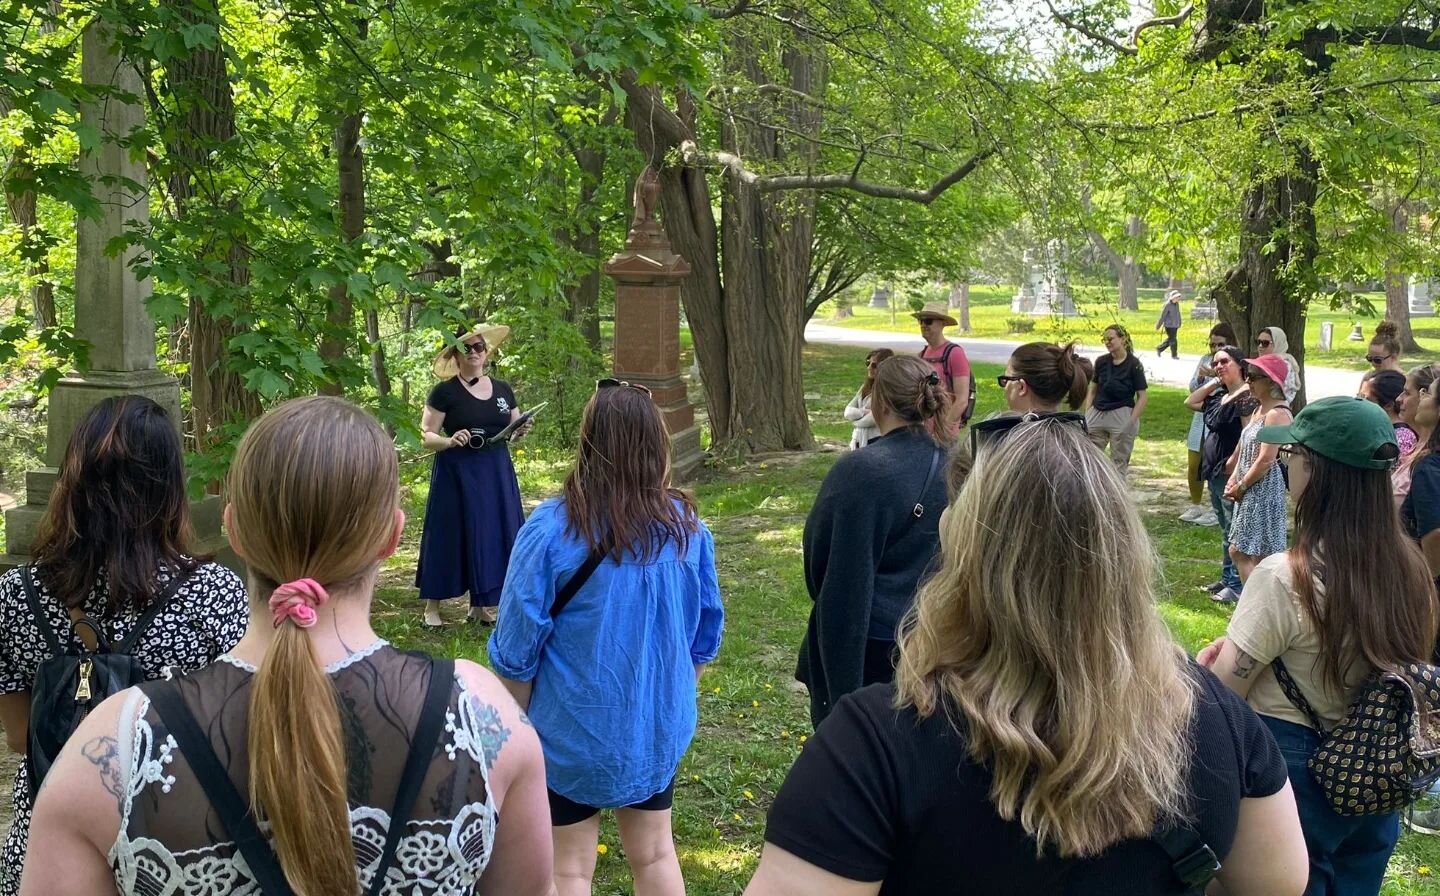 Yesterday was the perfect day to kick off a tour weekend.  Perfect weather and all attendees were so engaged and had a great time.  We're doing it again today at 1pm.  See you in the cemetery!  Link in bio.